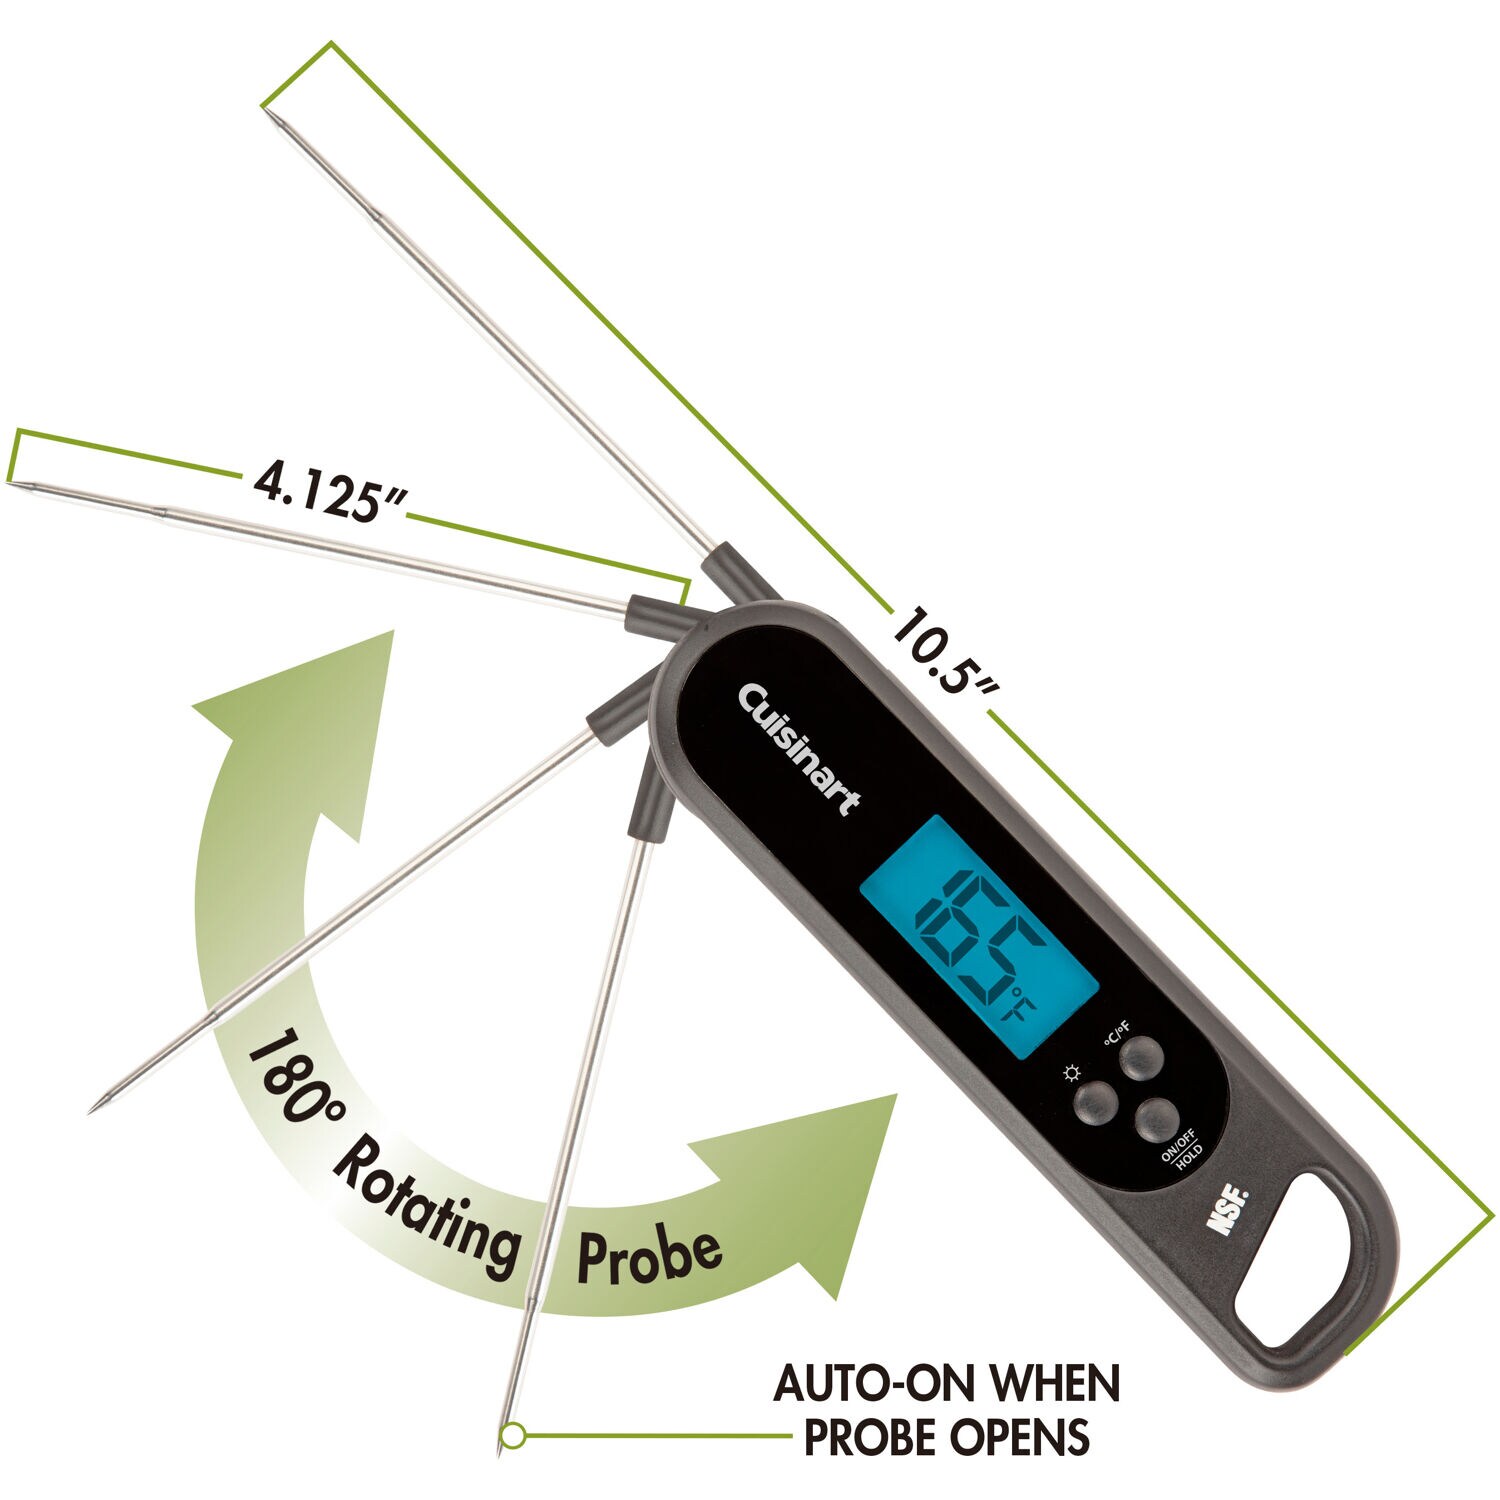 Cuisinart Digital Leave-in Meat Thermometer in the Meat Thermometers  department at